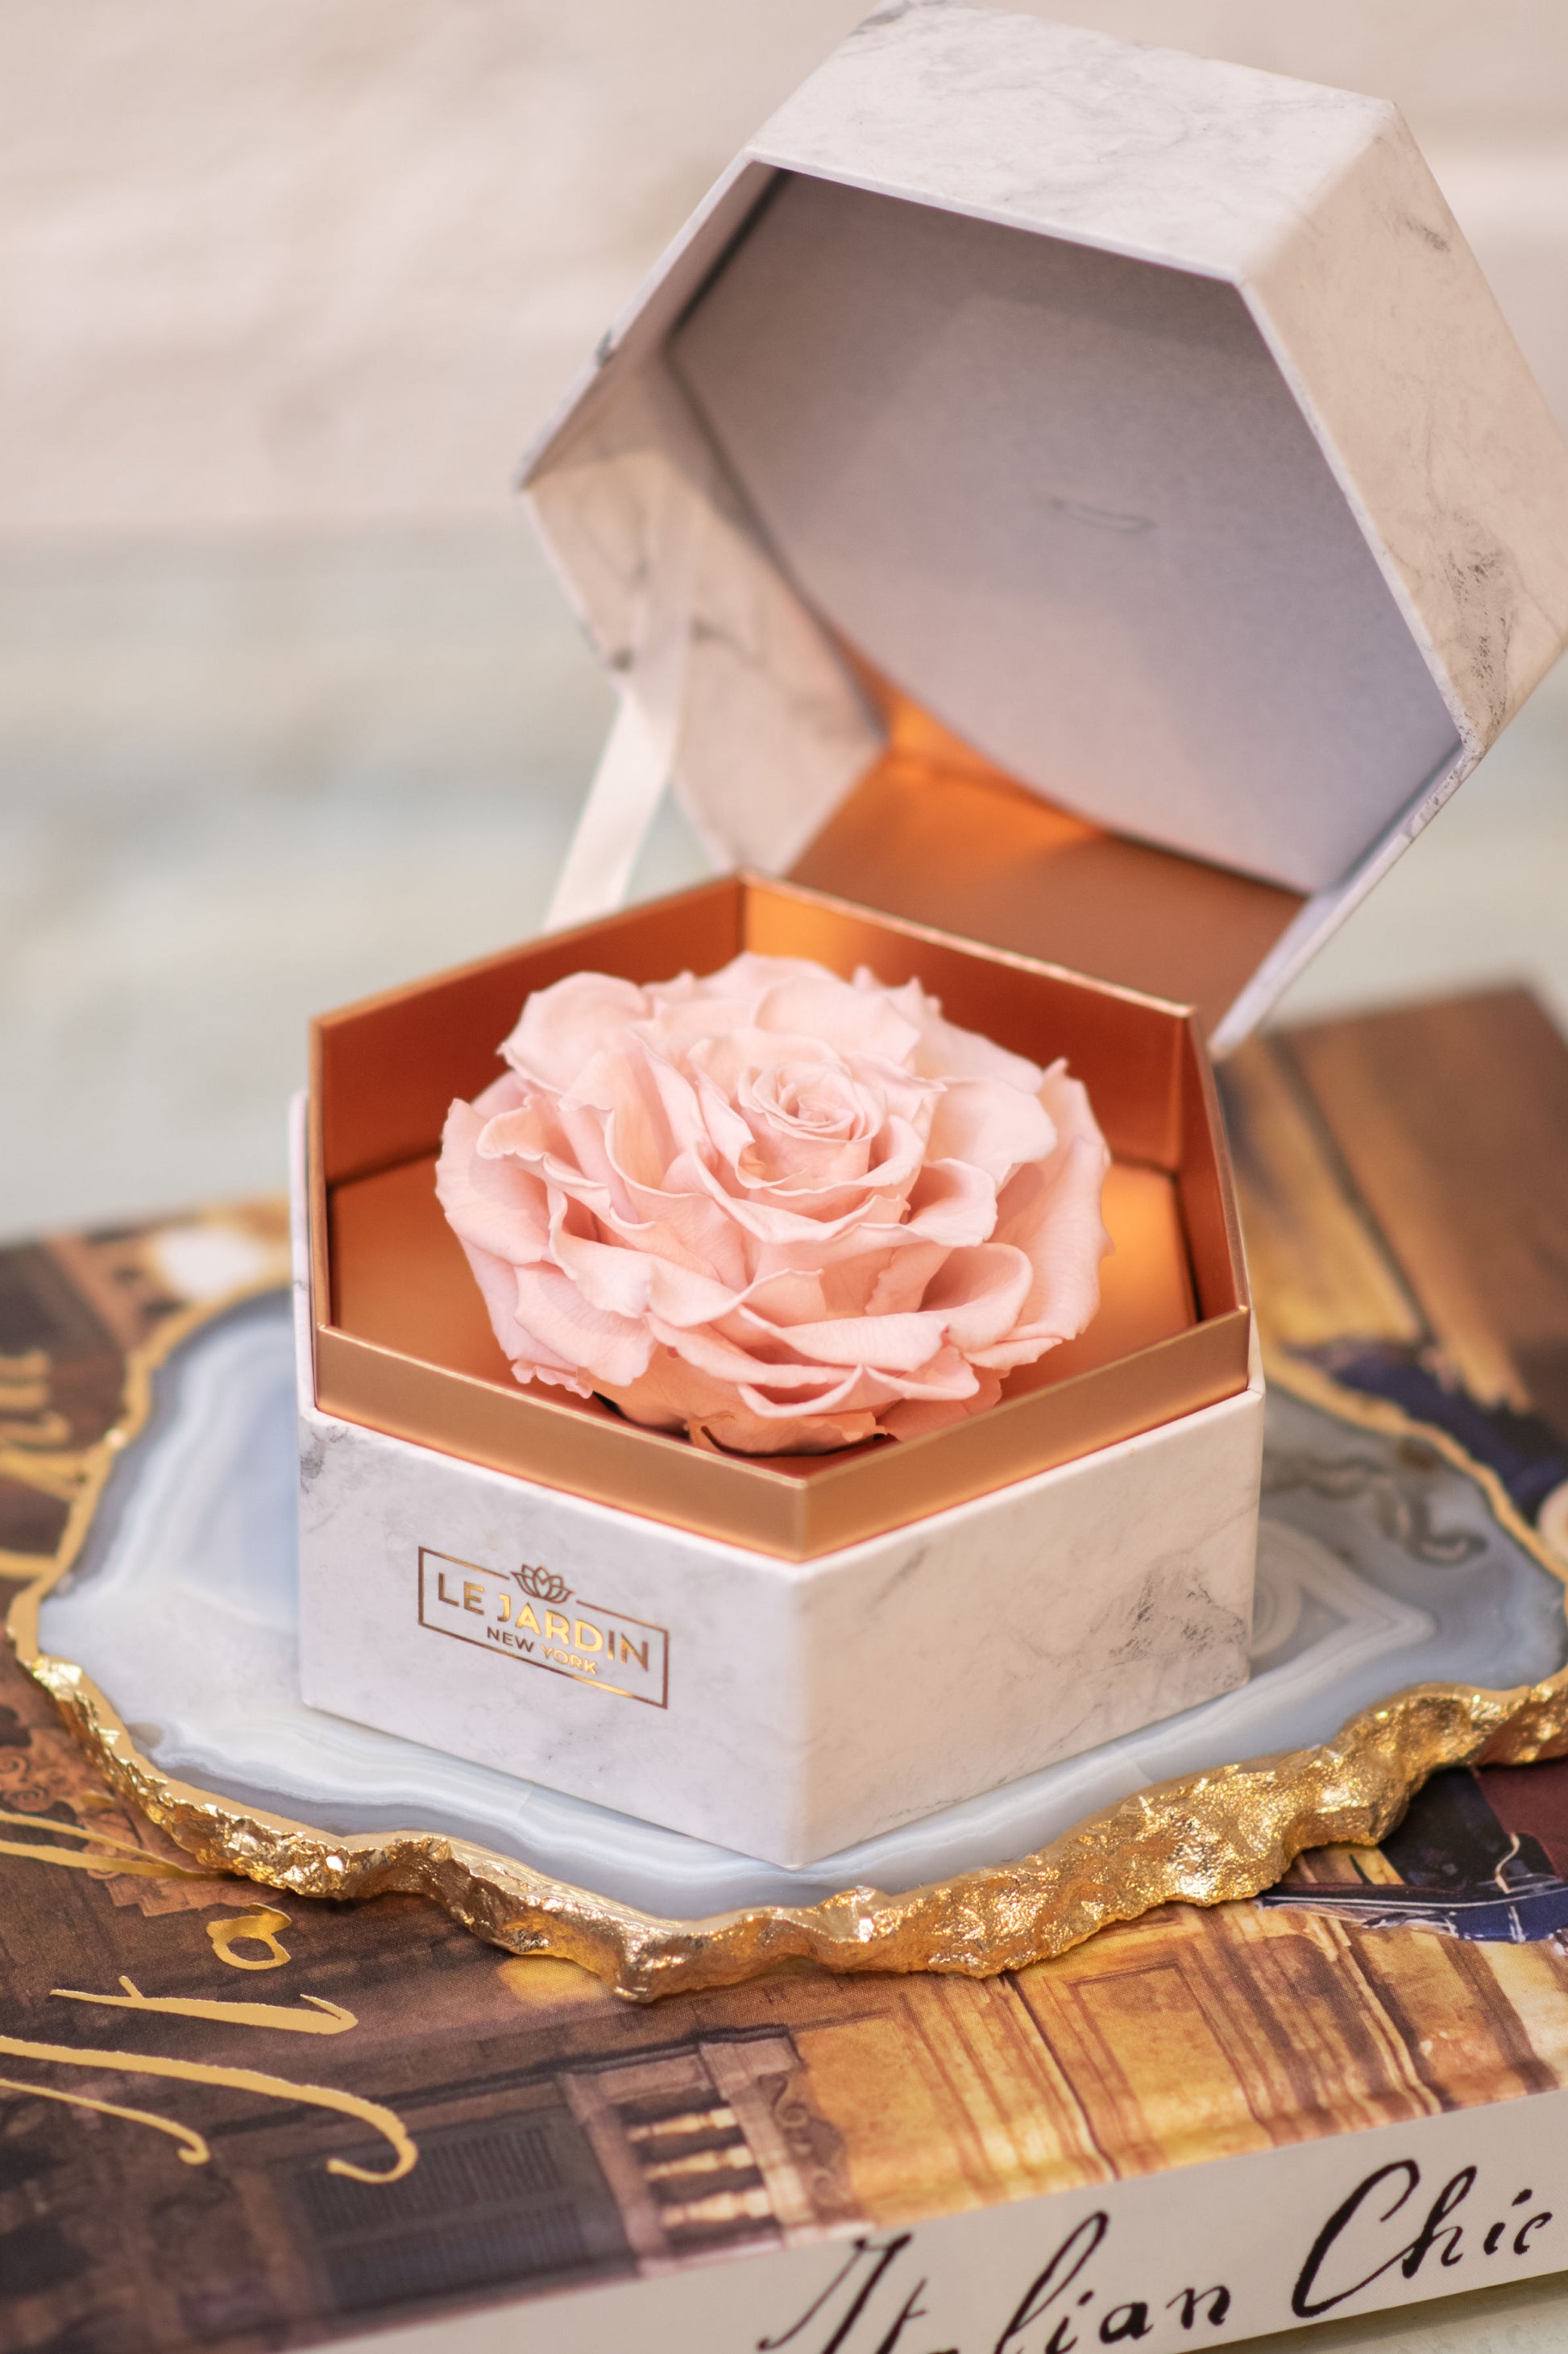 Mother's Day Square Preserved Flower Box